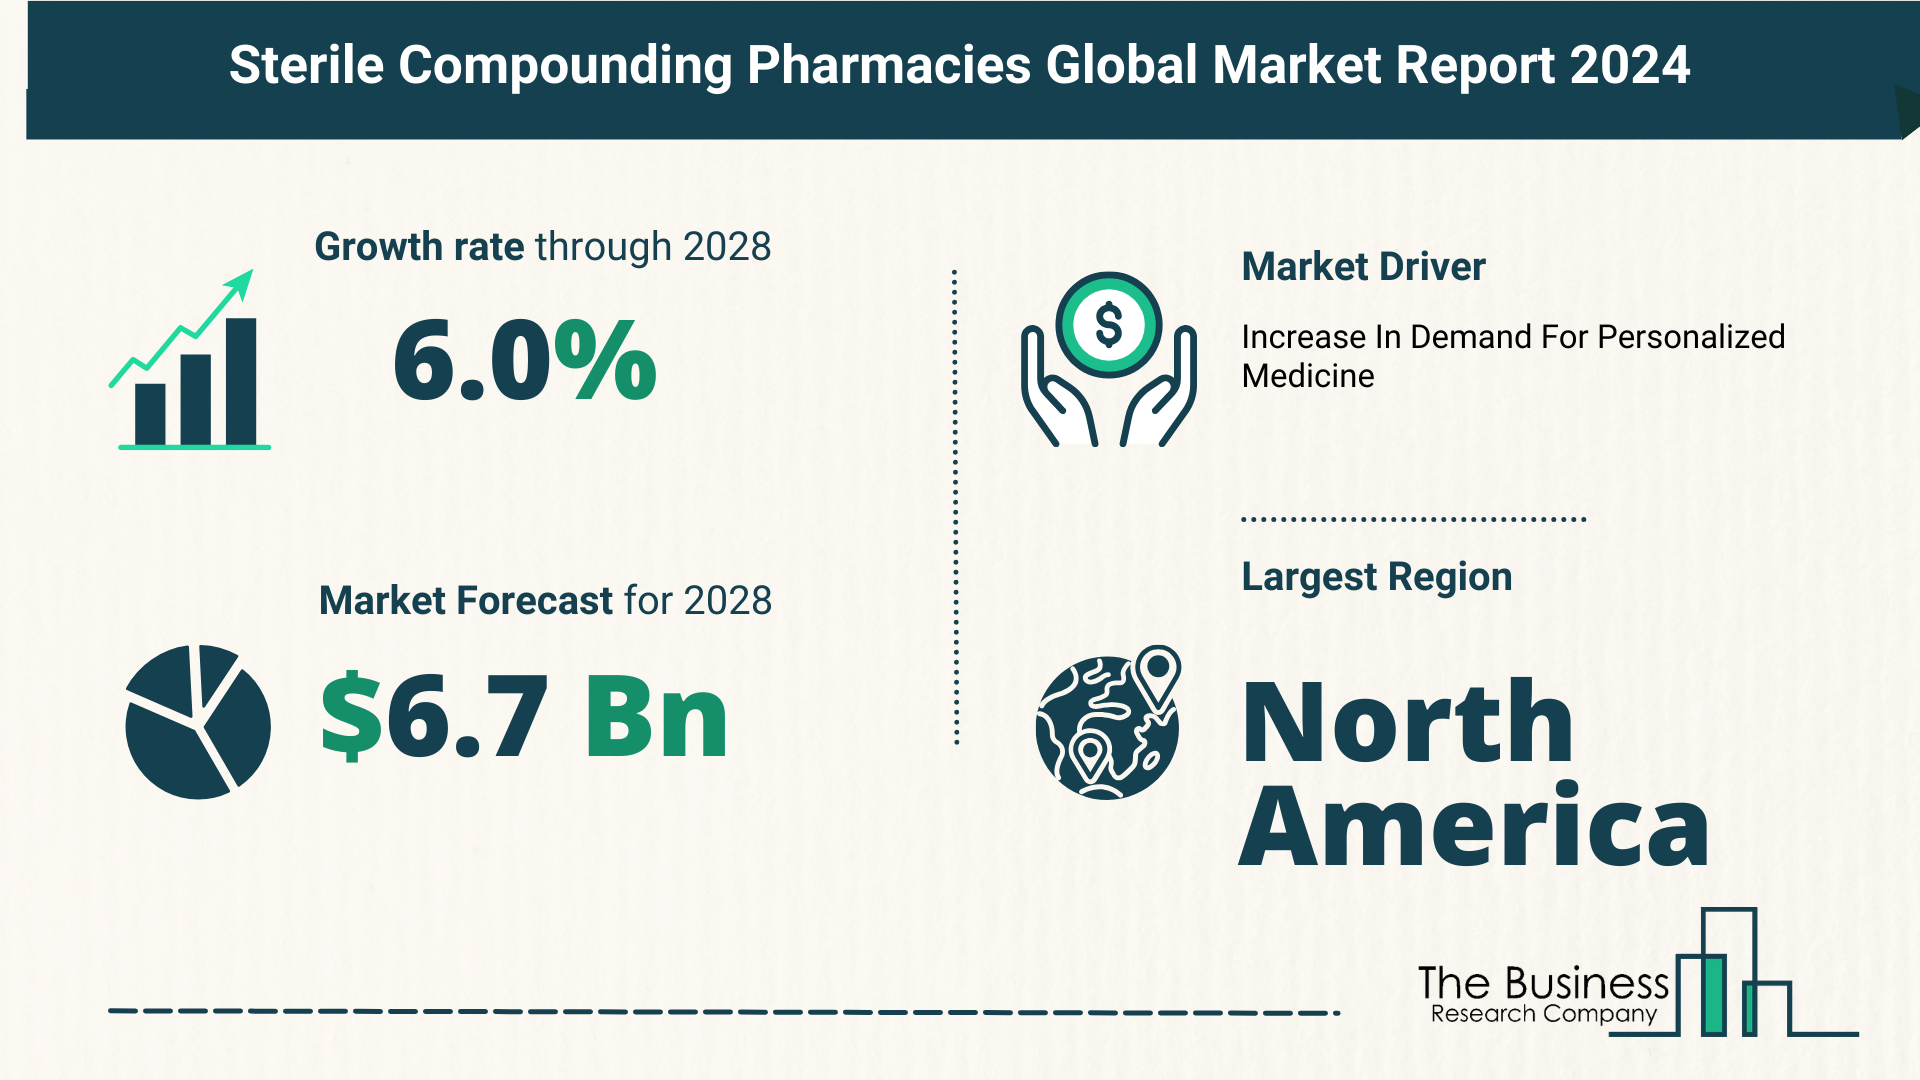 Top 5 Insights From The Sterile Compounding Pharmacies Market Report 2024